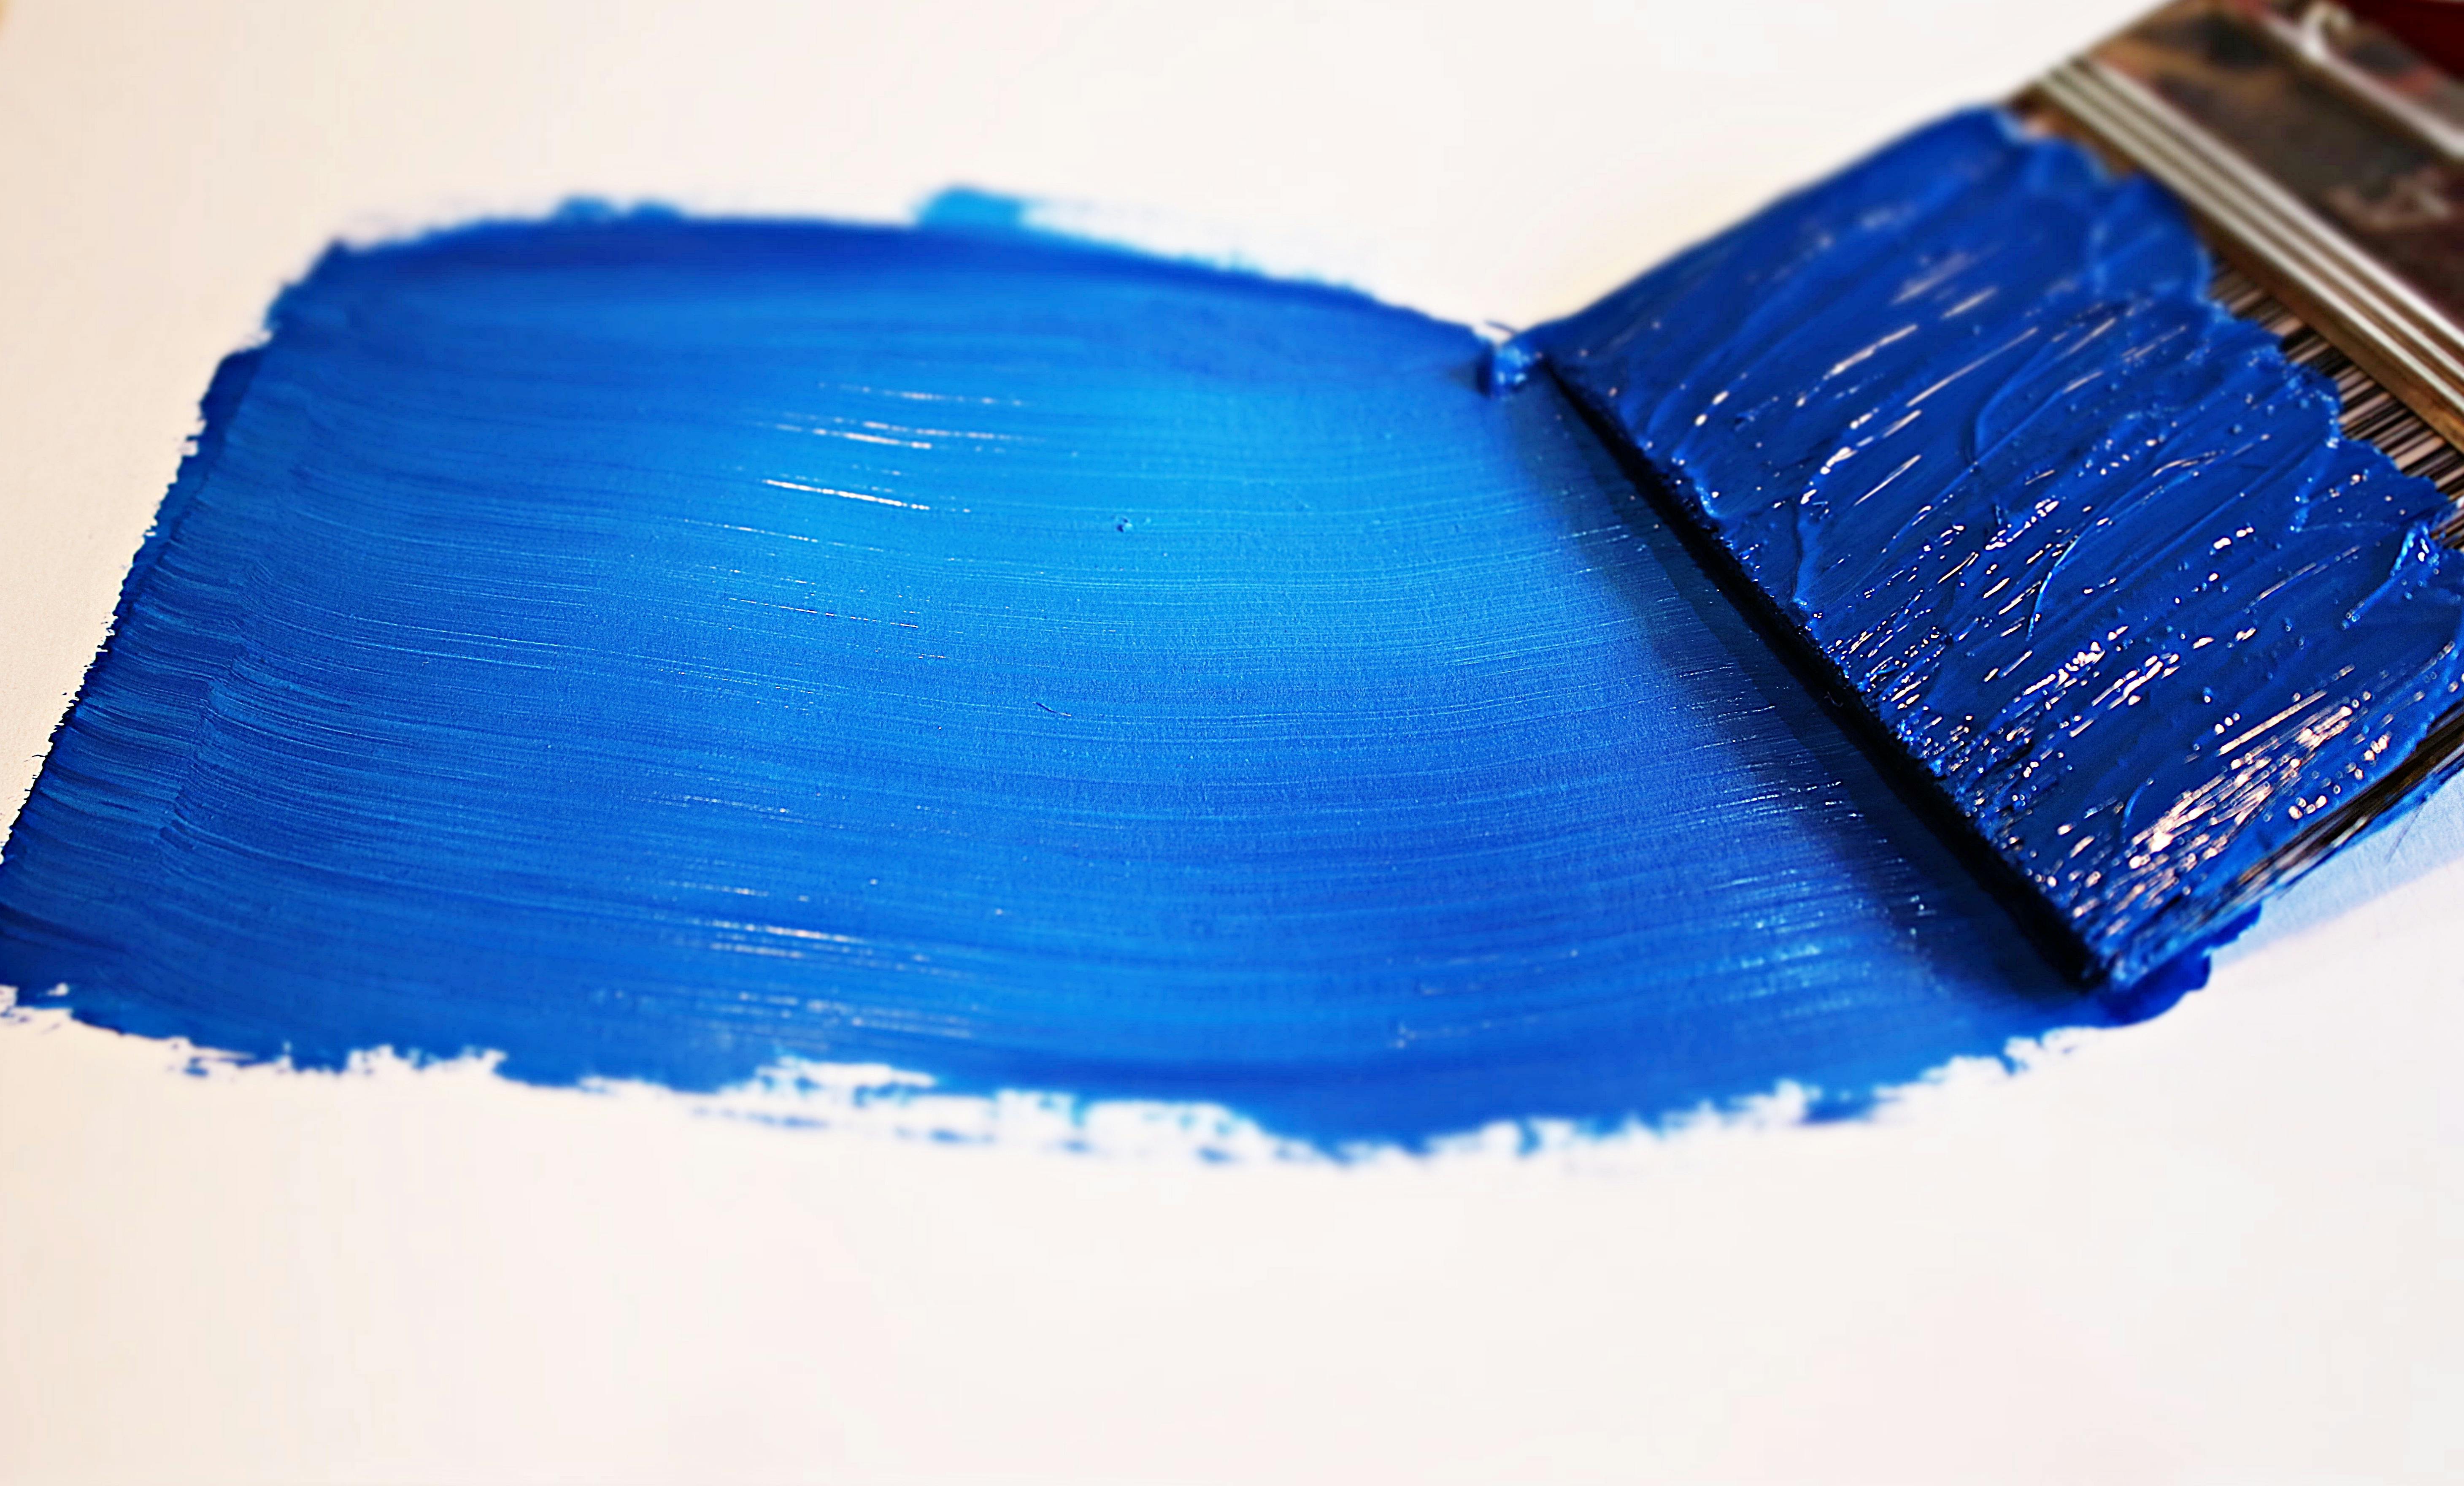 how to do a paint touch up prior to selling your home